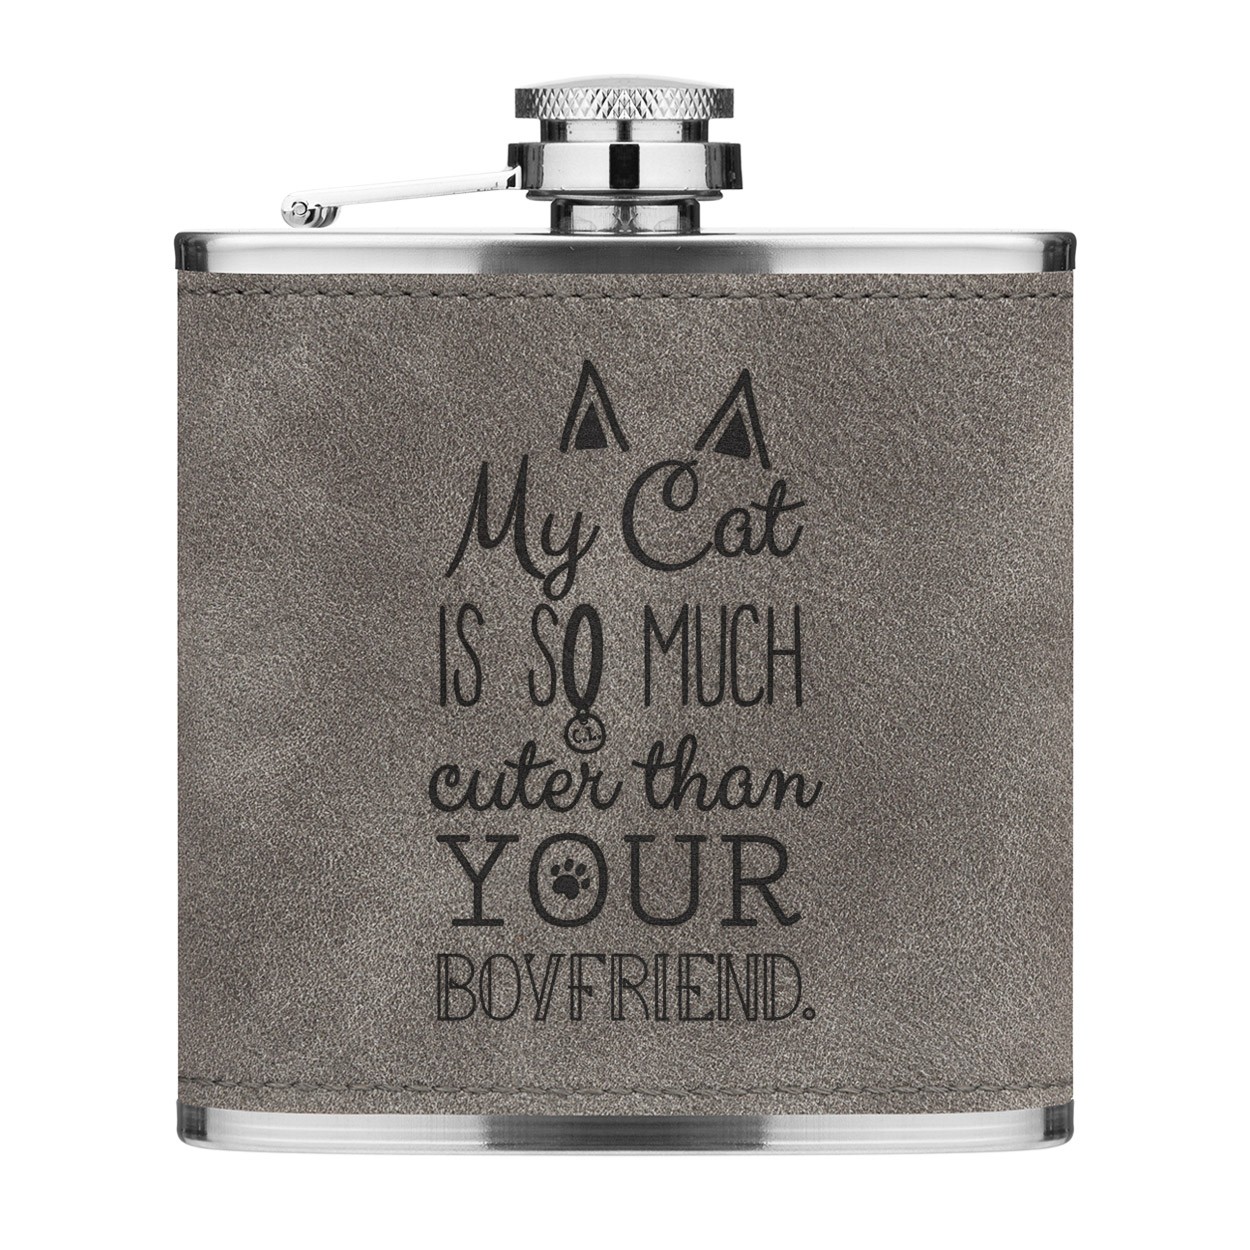 My Cat Is So Much Cuter Than Your Boyfriend 6oz PU Leather Hip Flask Grey Luxe